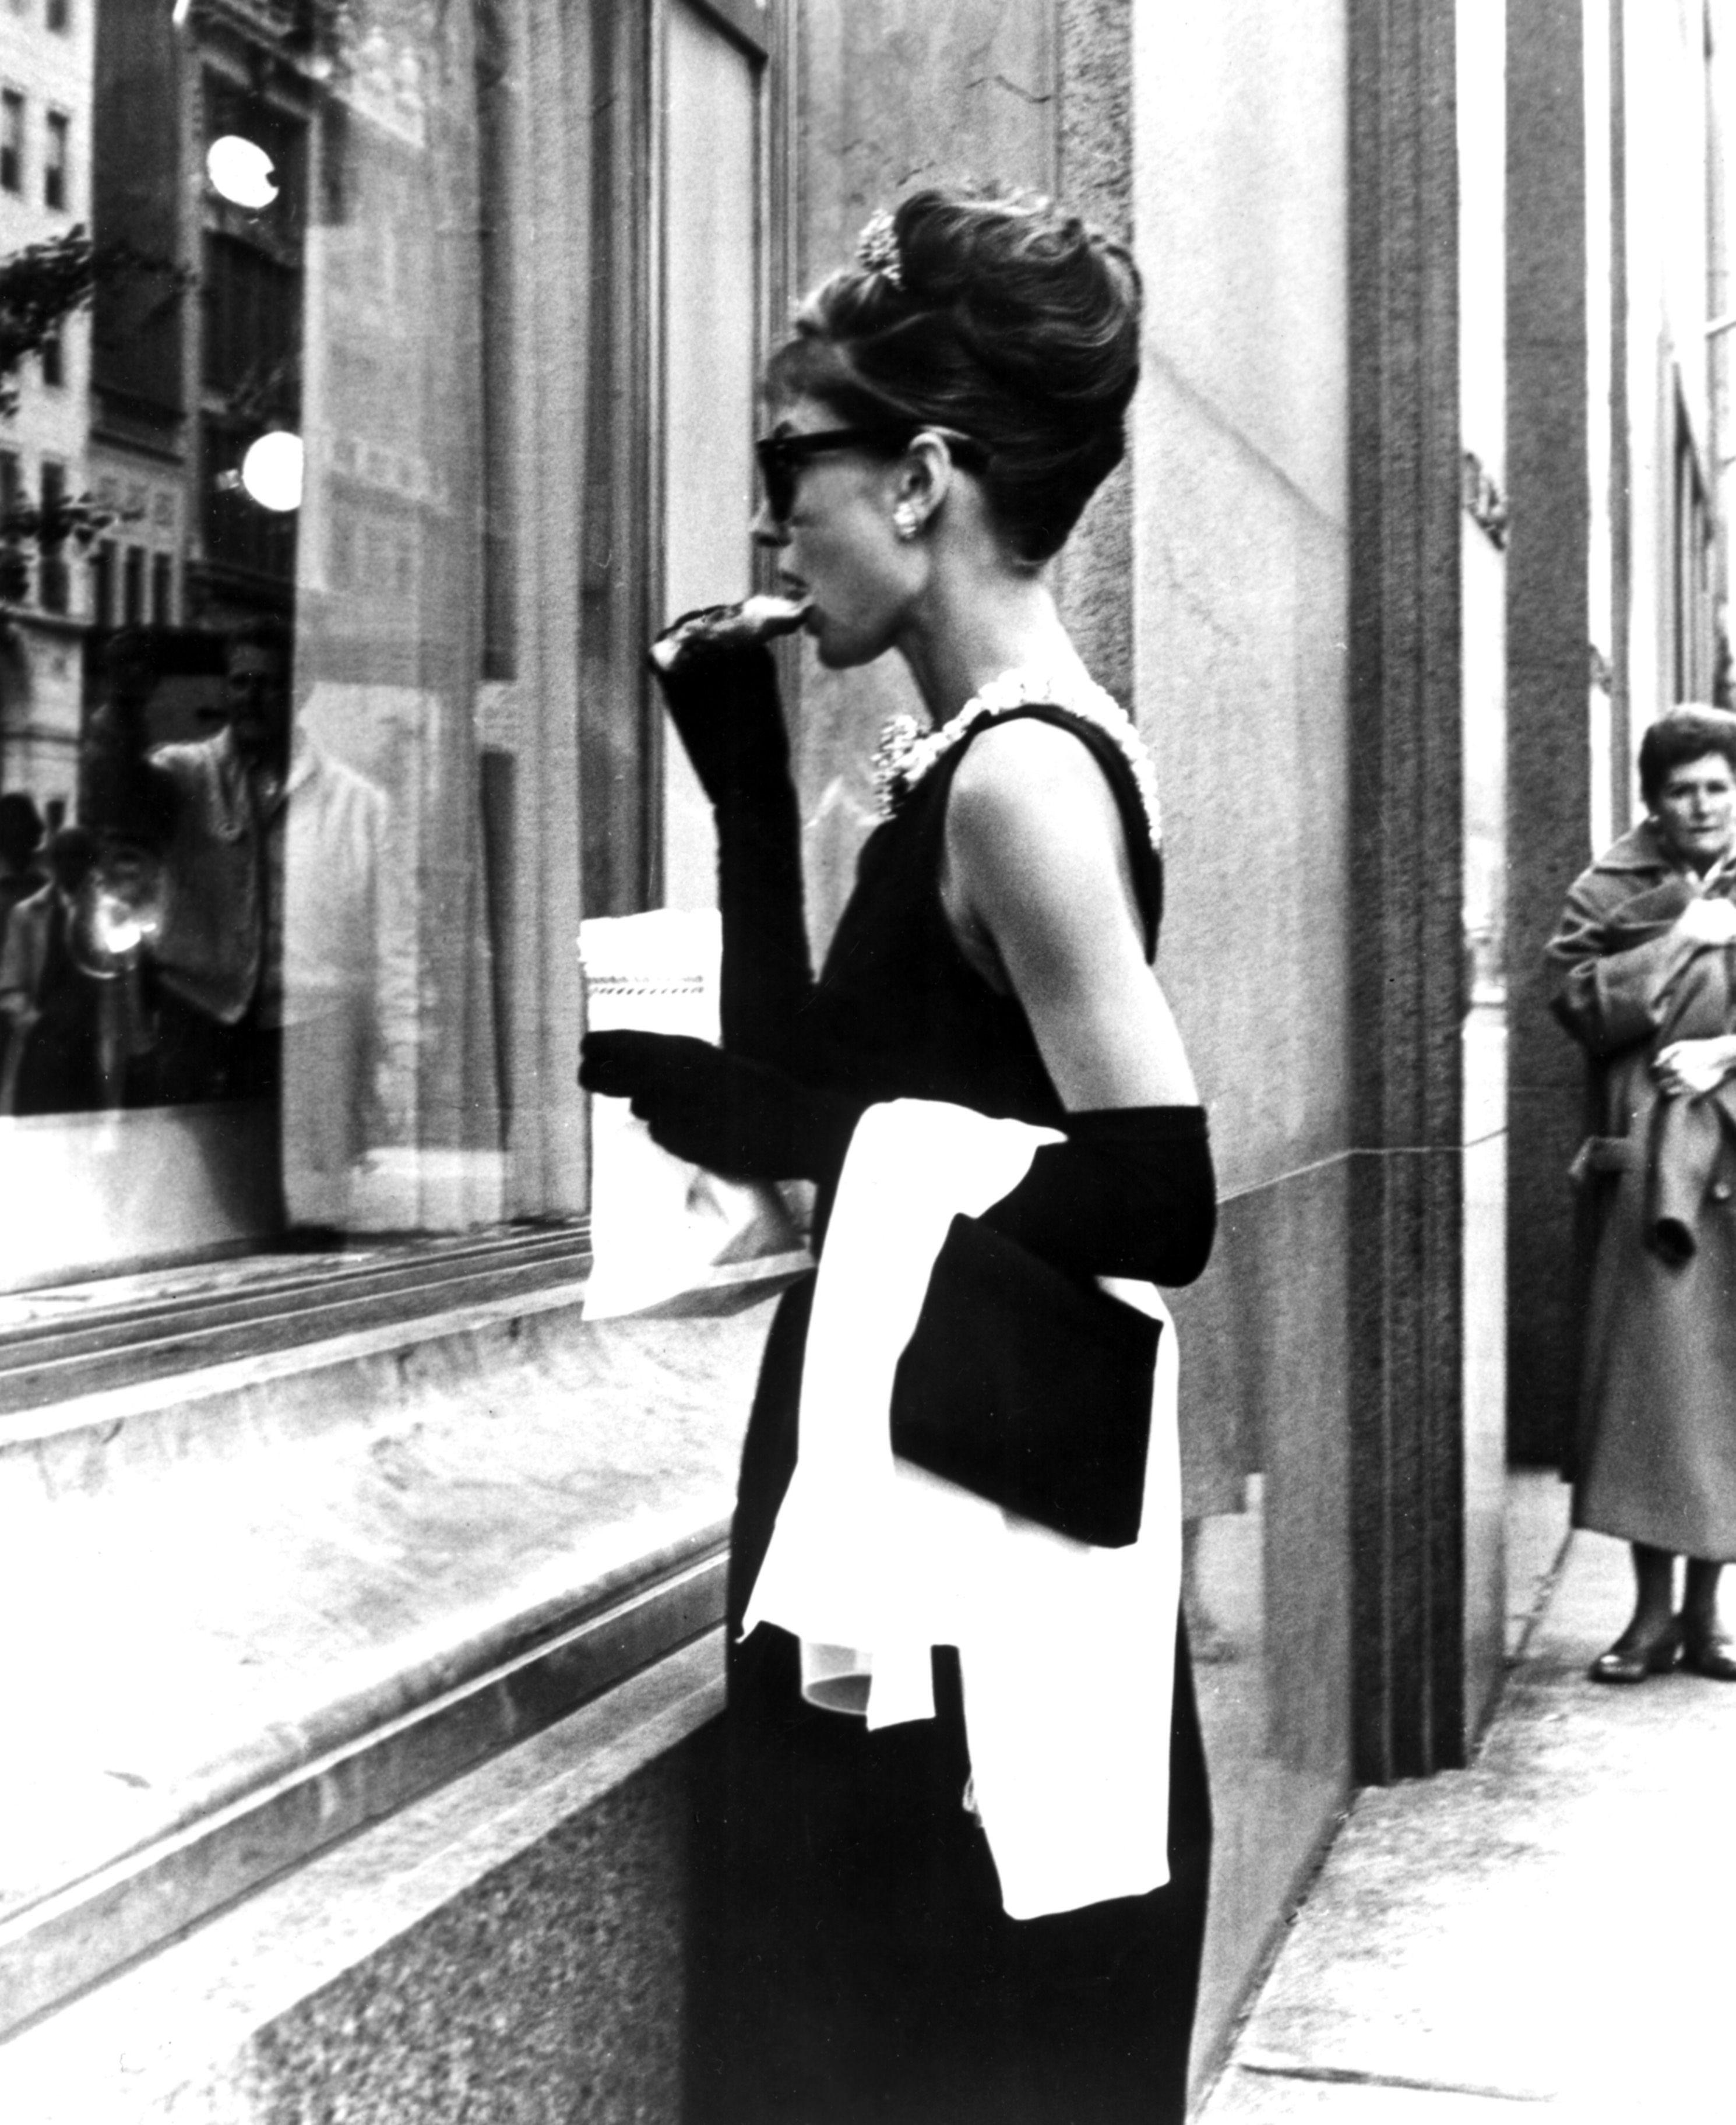 Breakfast at Tiffany's. FROM THE BYGONE